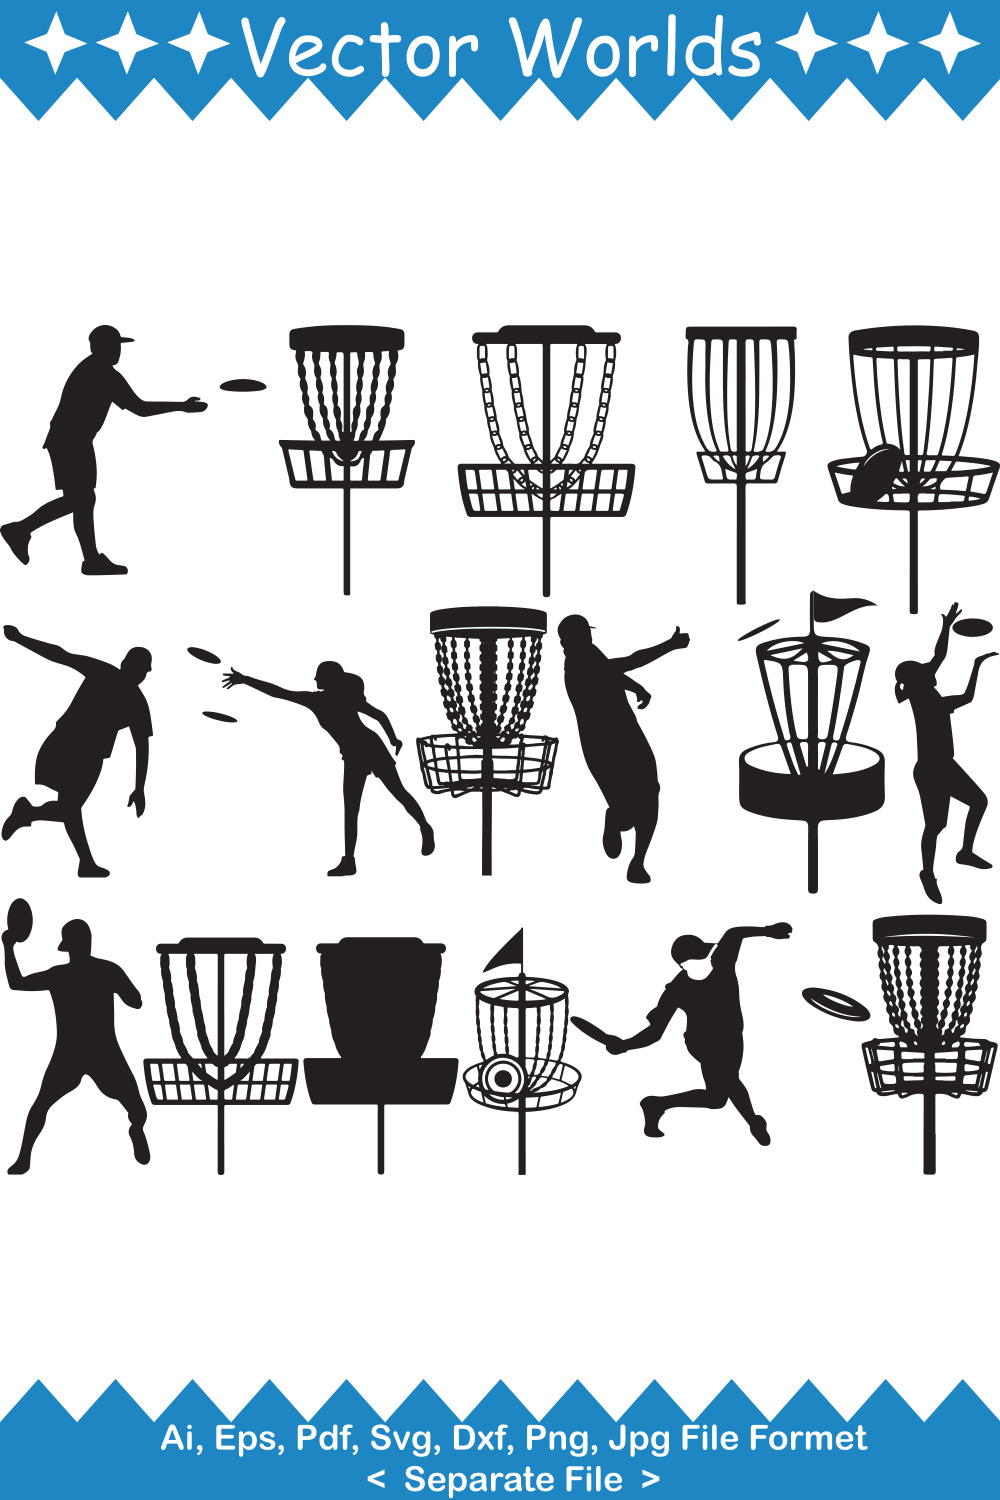 A collection of amazing images of basket silhouettes for Disc Golf